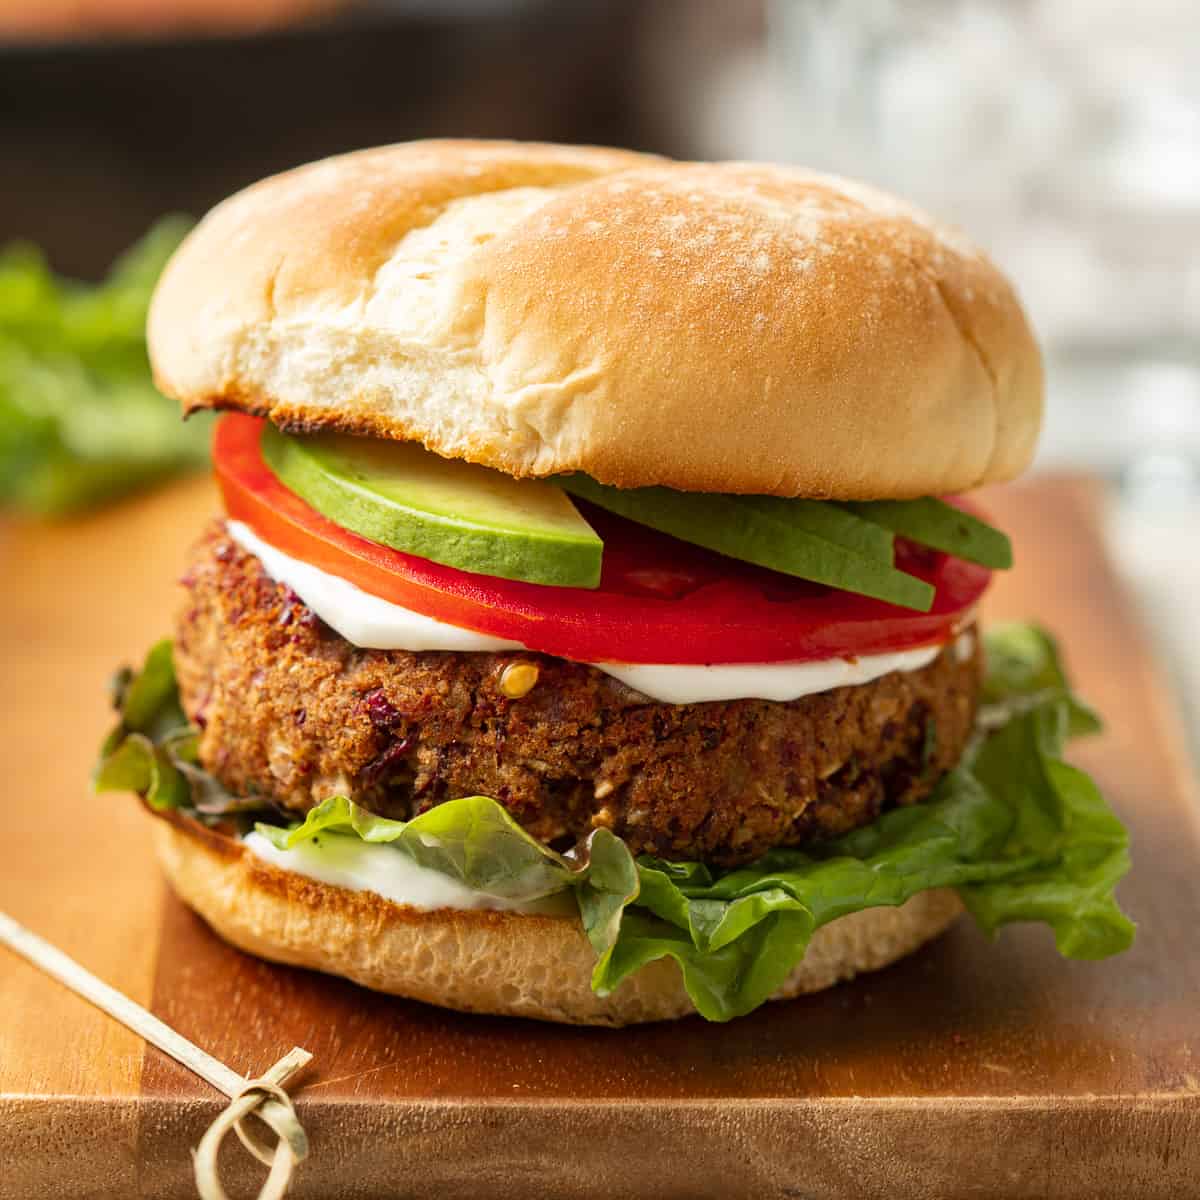 Kidney Bean Burger on a wooden surface with a skewer on the side.